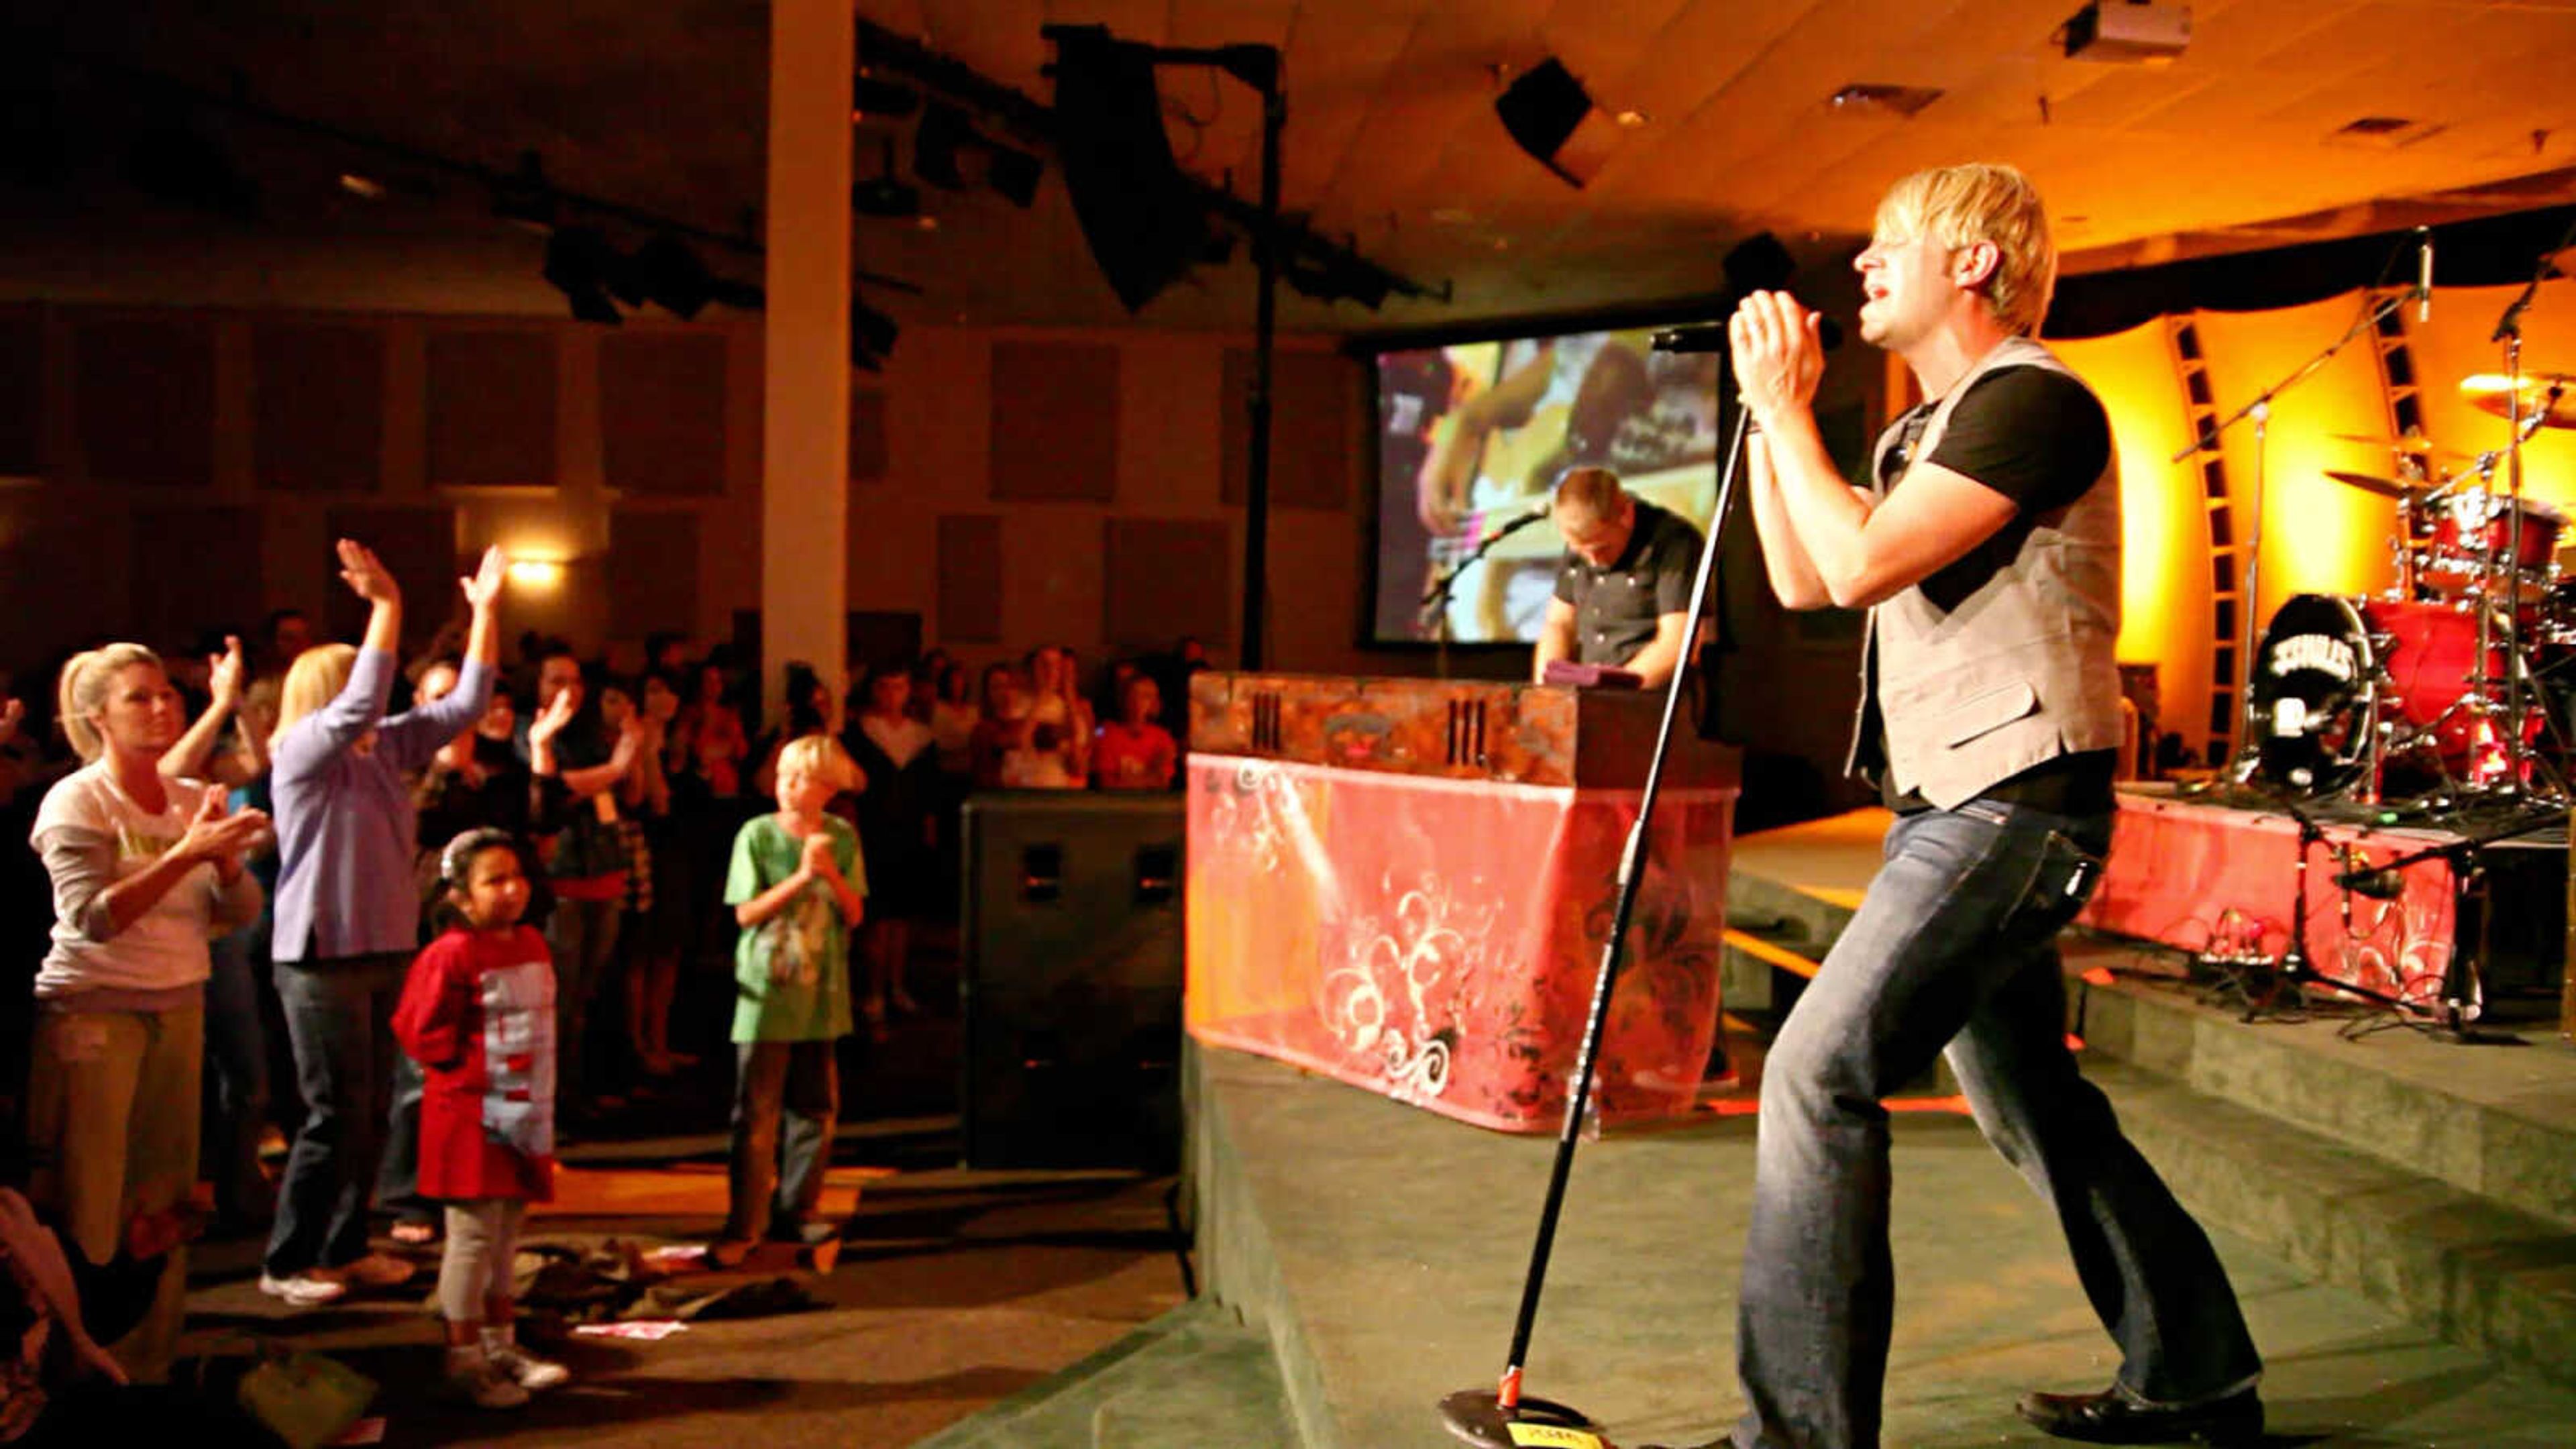 Jason Barton, lead singer of 33 Miles, performs onstage at a concert at Cape First Church last year. Submitted photo